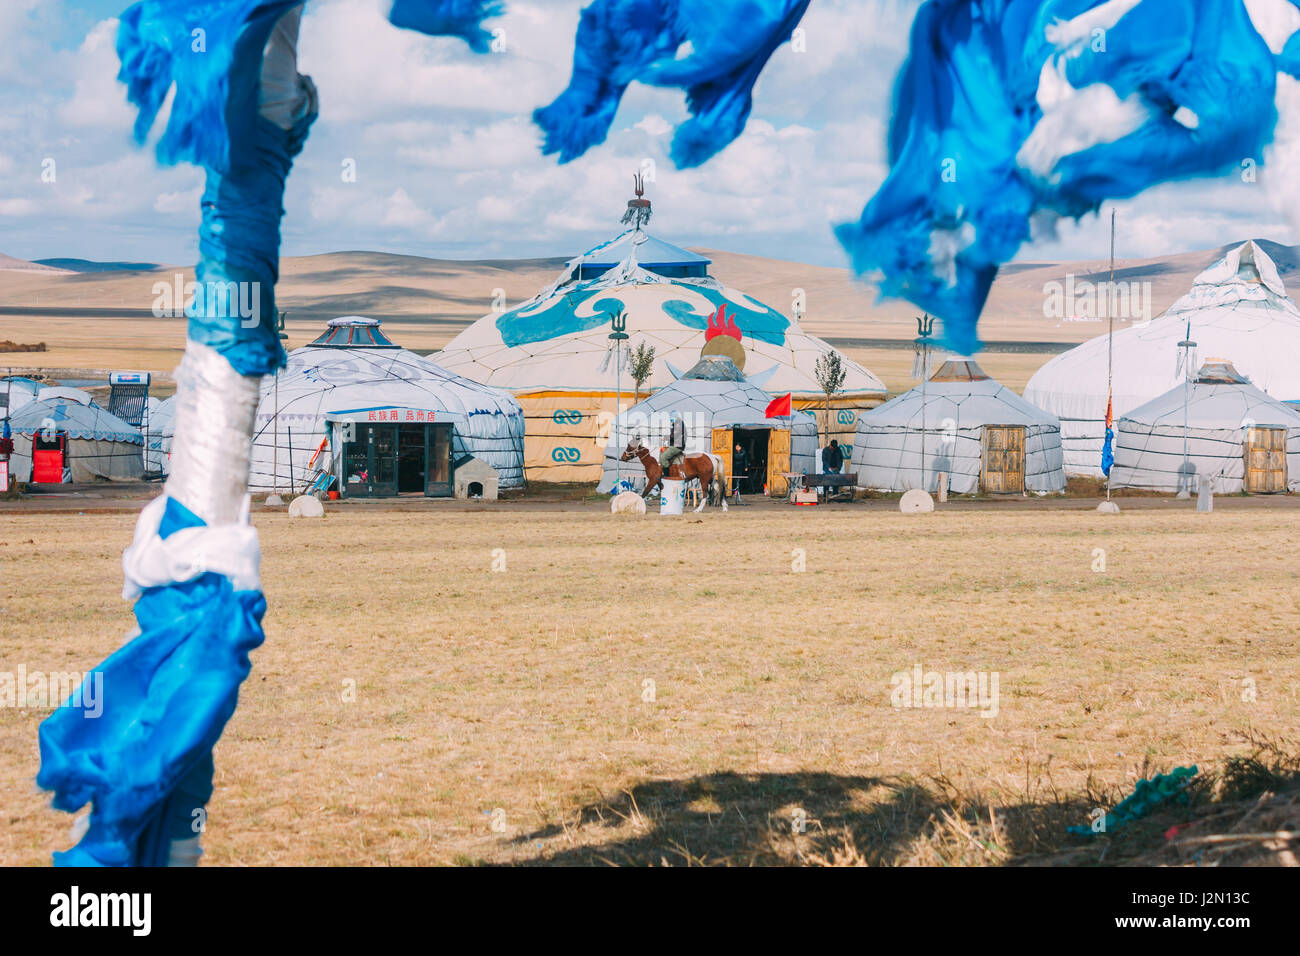 20140924 Inner mogolia,China white and blue obo and aobao in a front ,group of yurts in mongolia ,mongol totem, in grassland with blue sky,horizontal Stock Photo